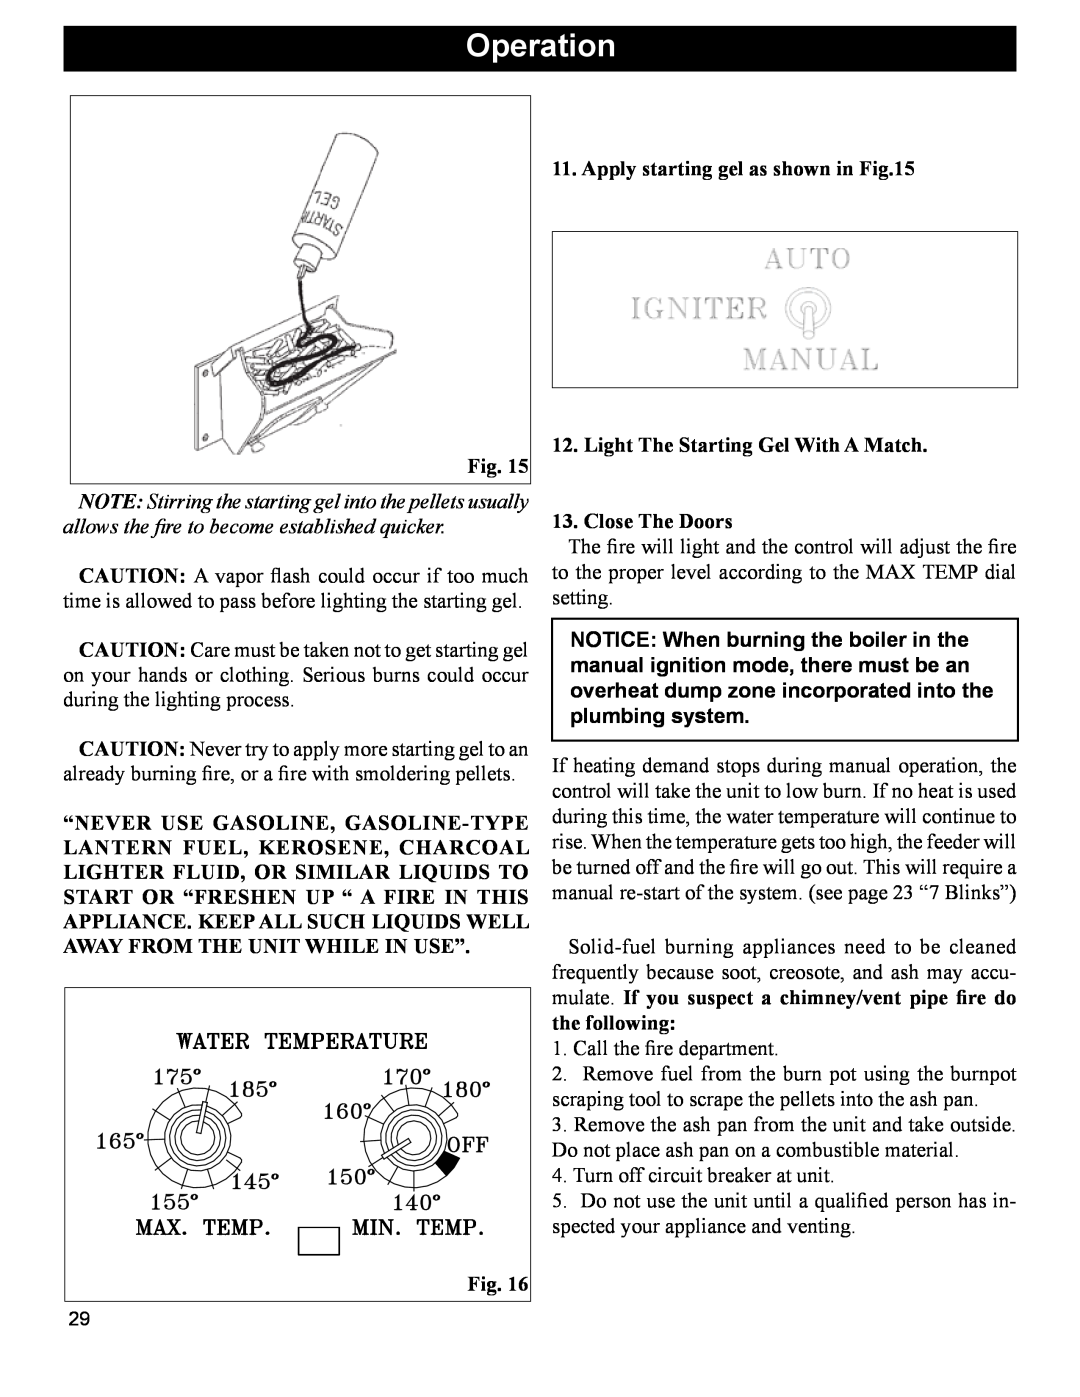 Hearth and Home Technologies BH 105 manual Operation, Apply starting gel as shown in 